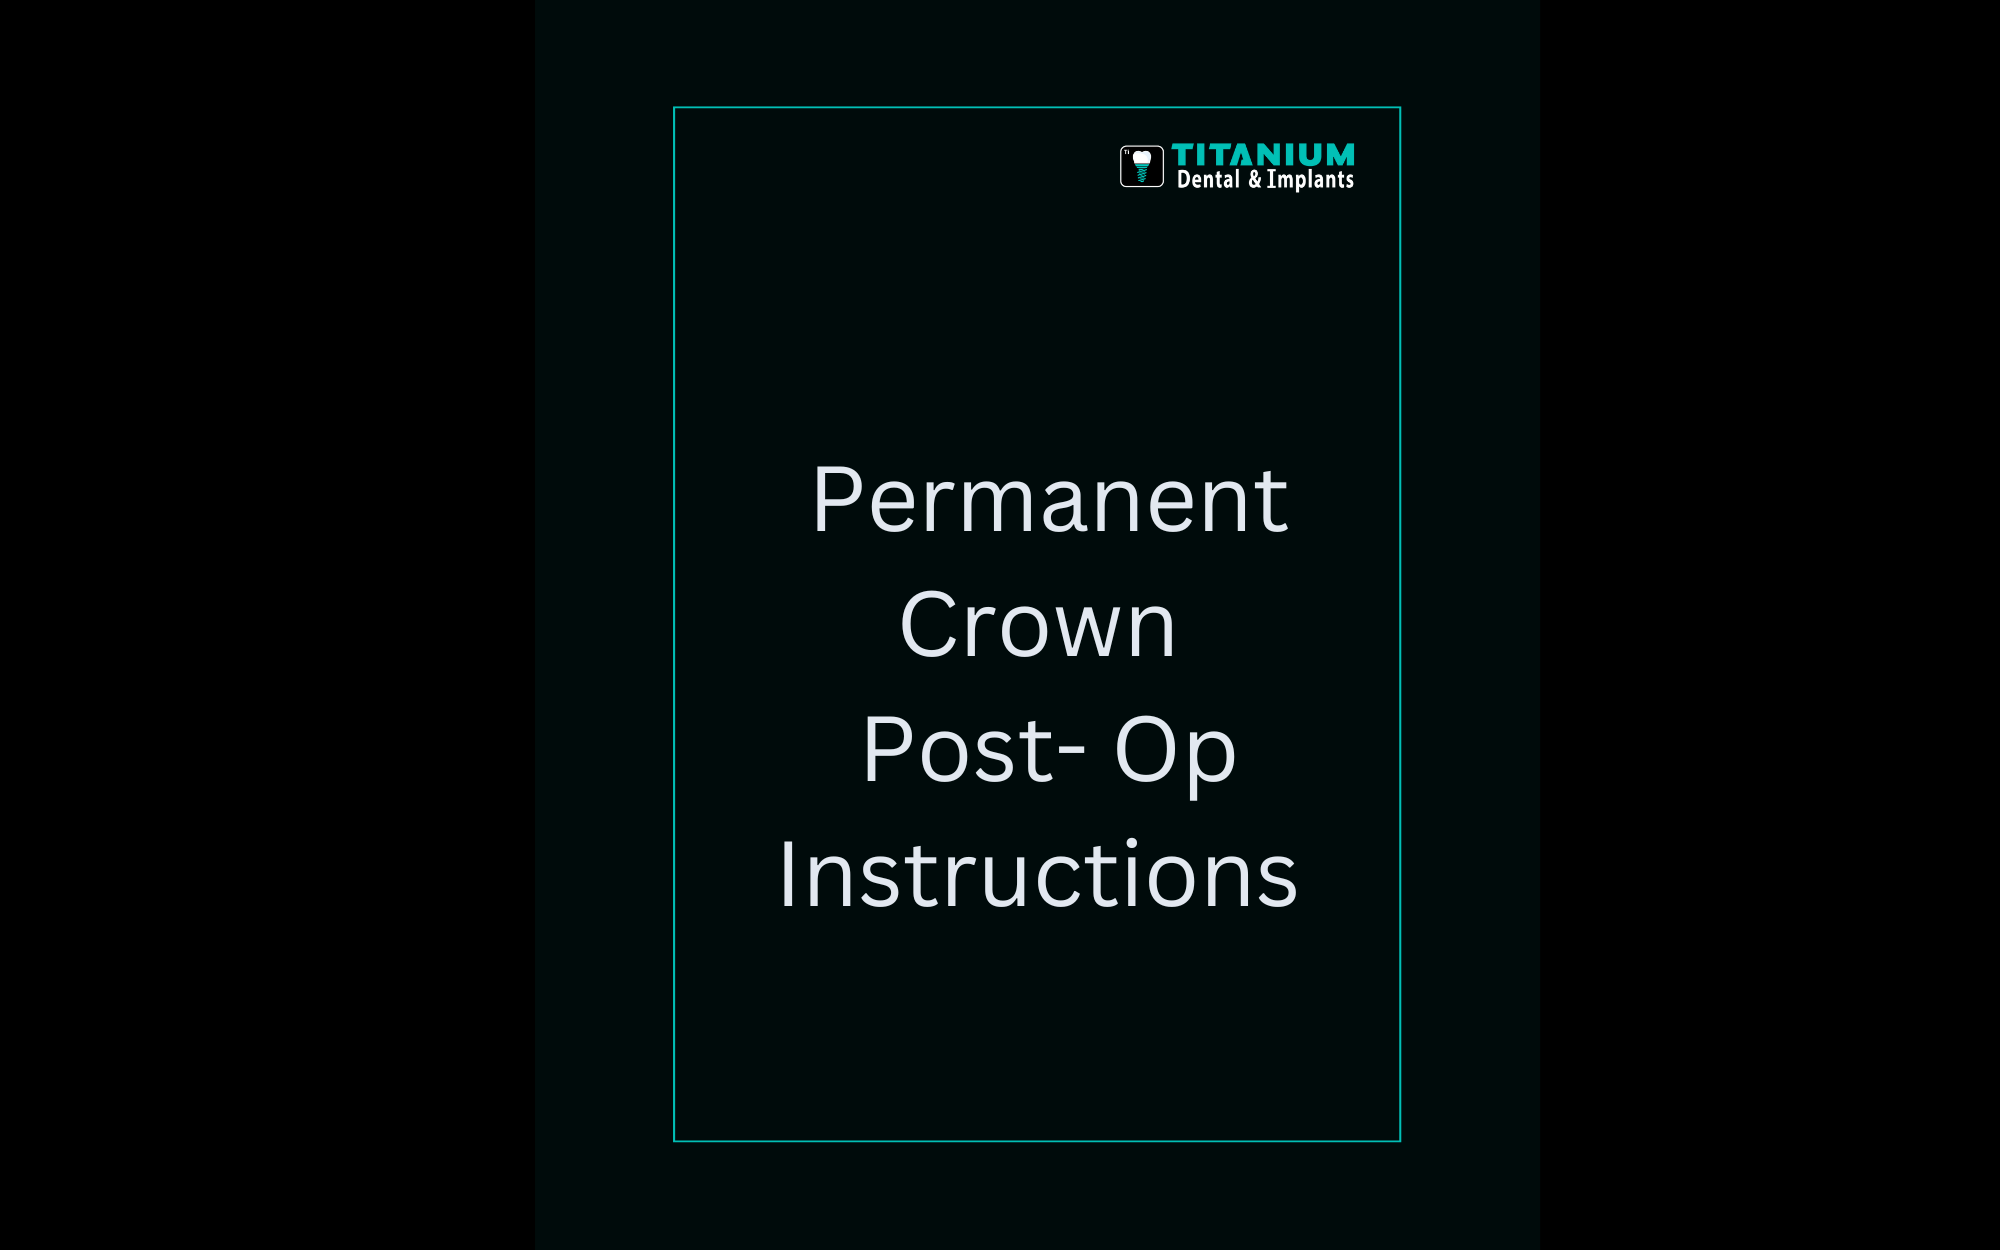 Permanent Crown Instructions